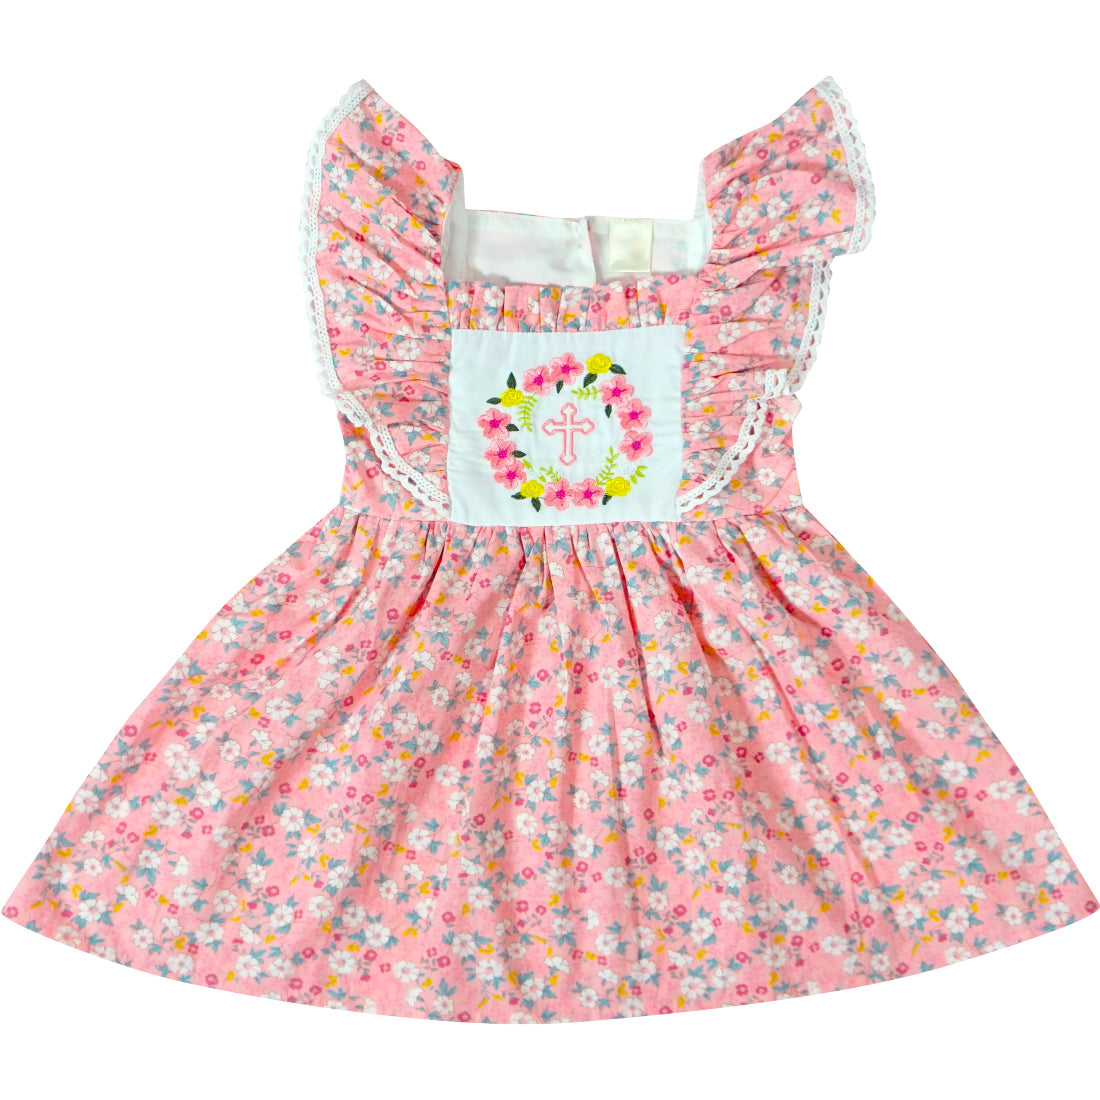 Baby Toddler Little Girls Easter Vintage Floral Cross Embroirdery Pinafore Cotton Dress